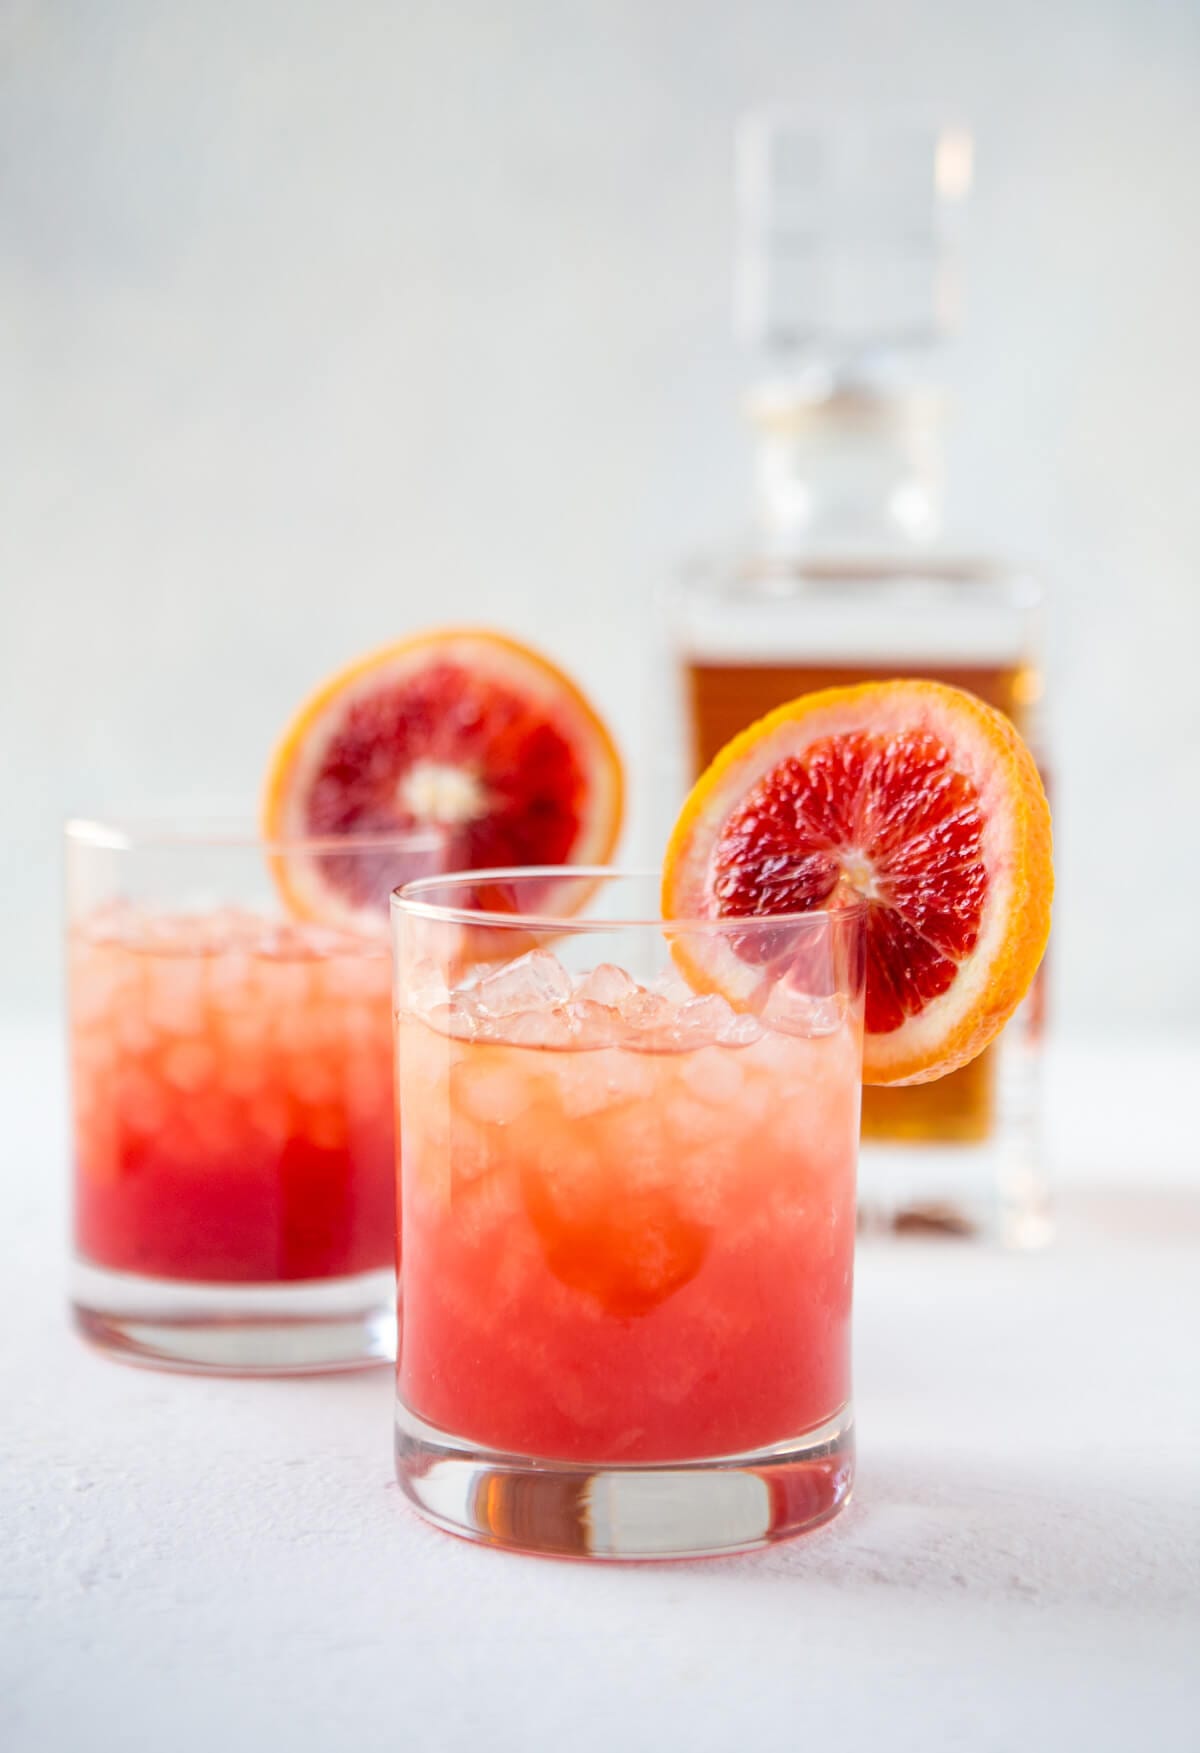 Blood Orange Whiskey | Winter Citrus Cocktail Recipes from Entertaining Blog @cydconverse